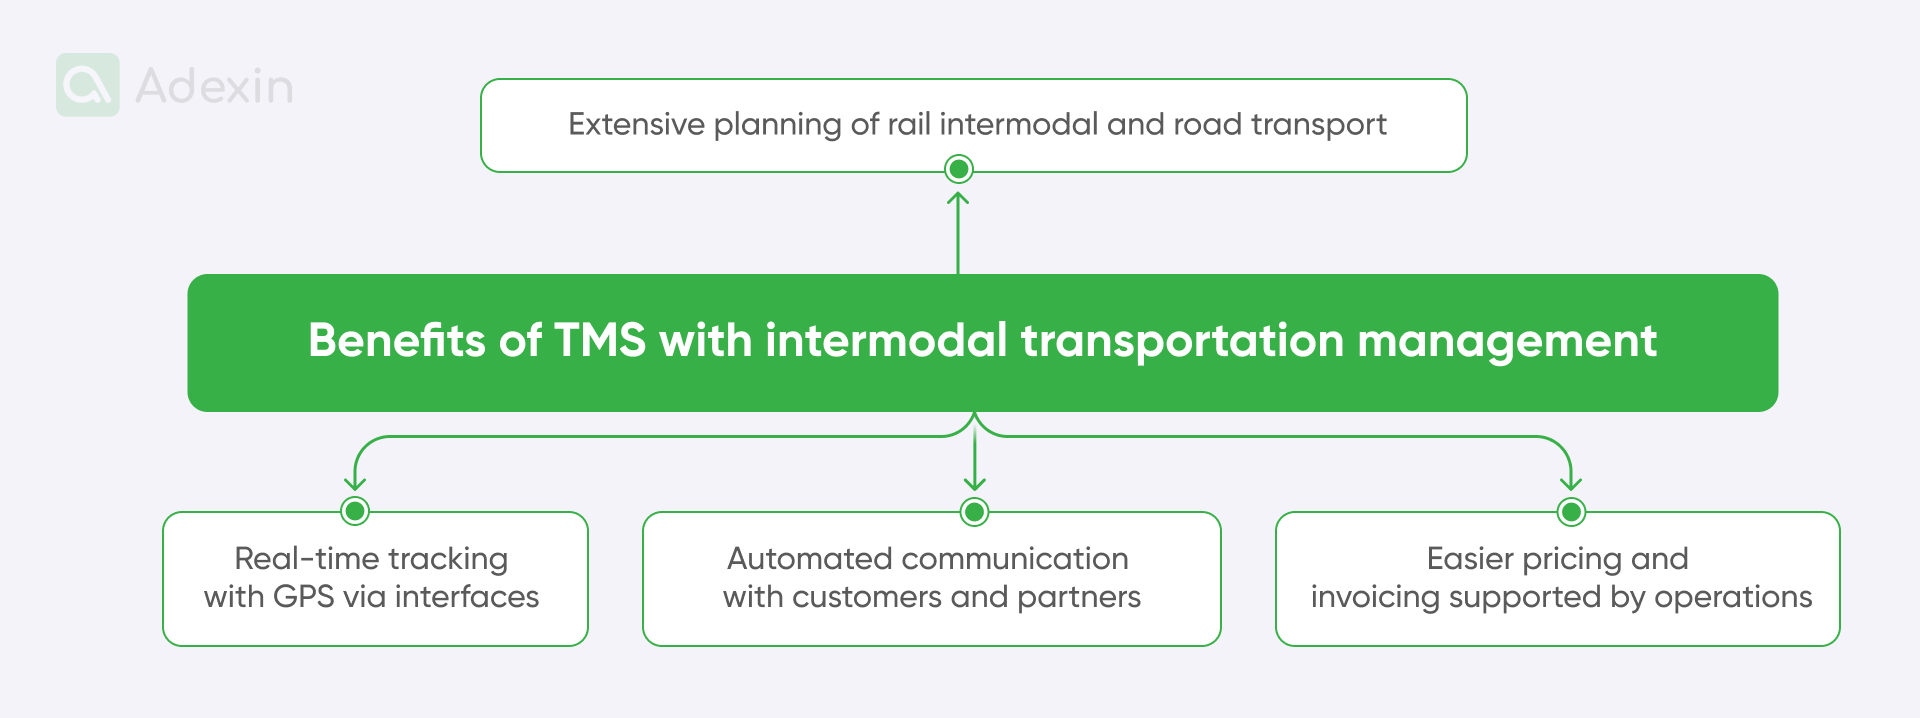 Benefits of TMS with intermodal transportation management